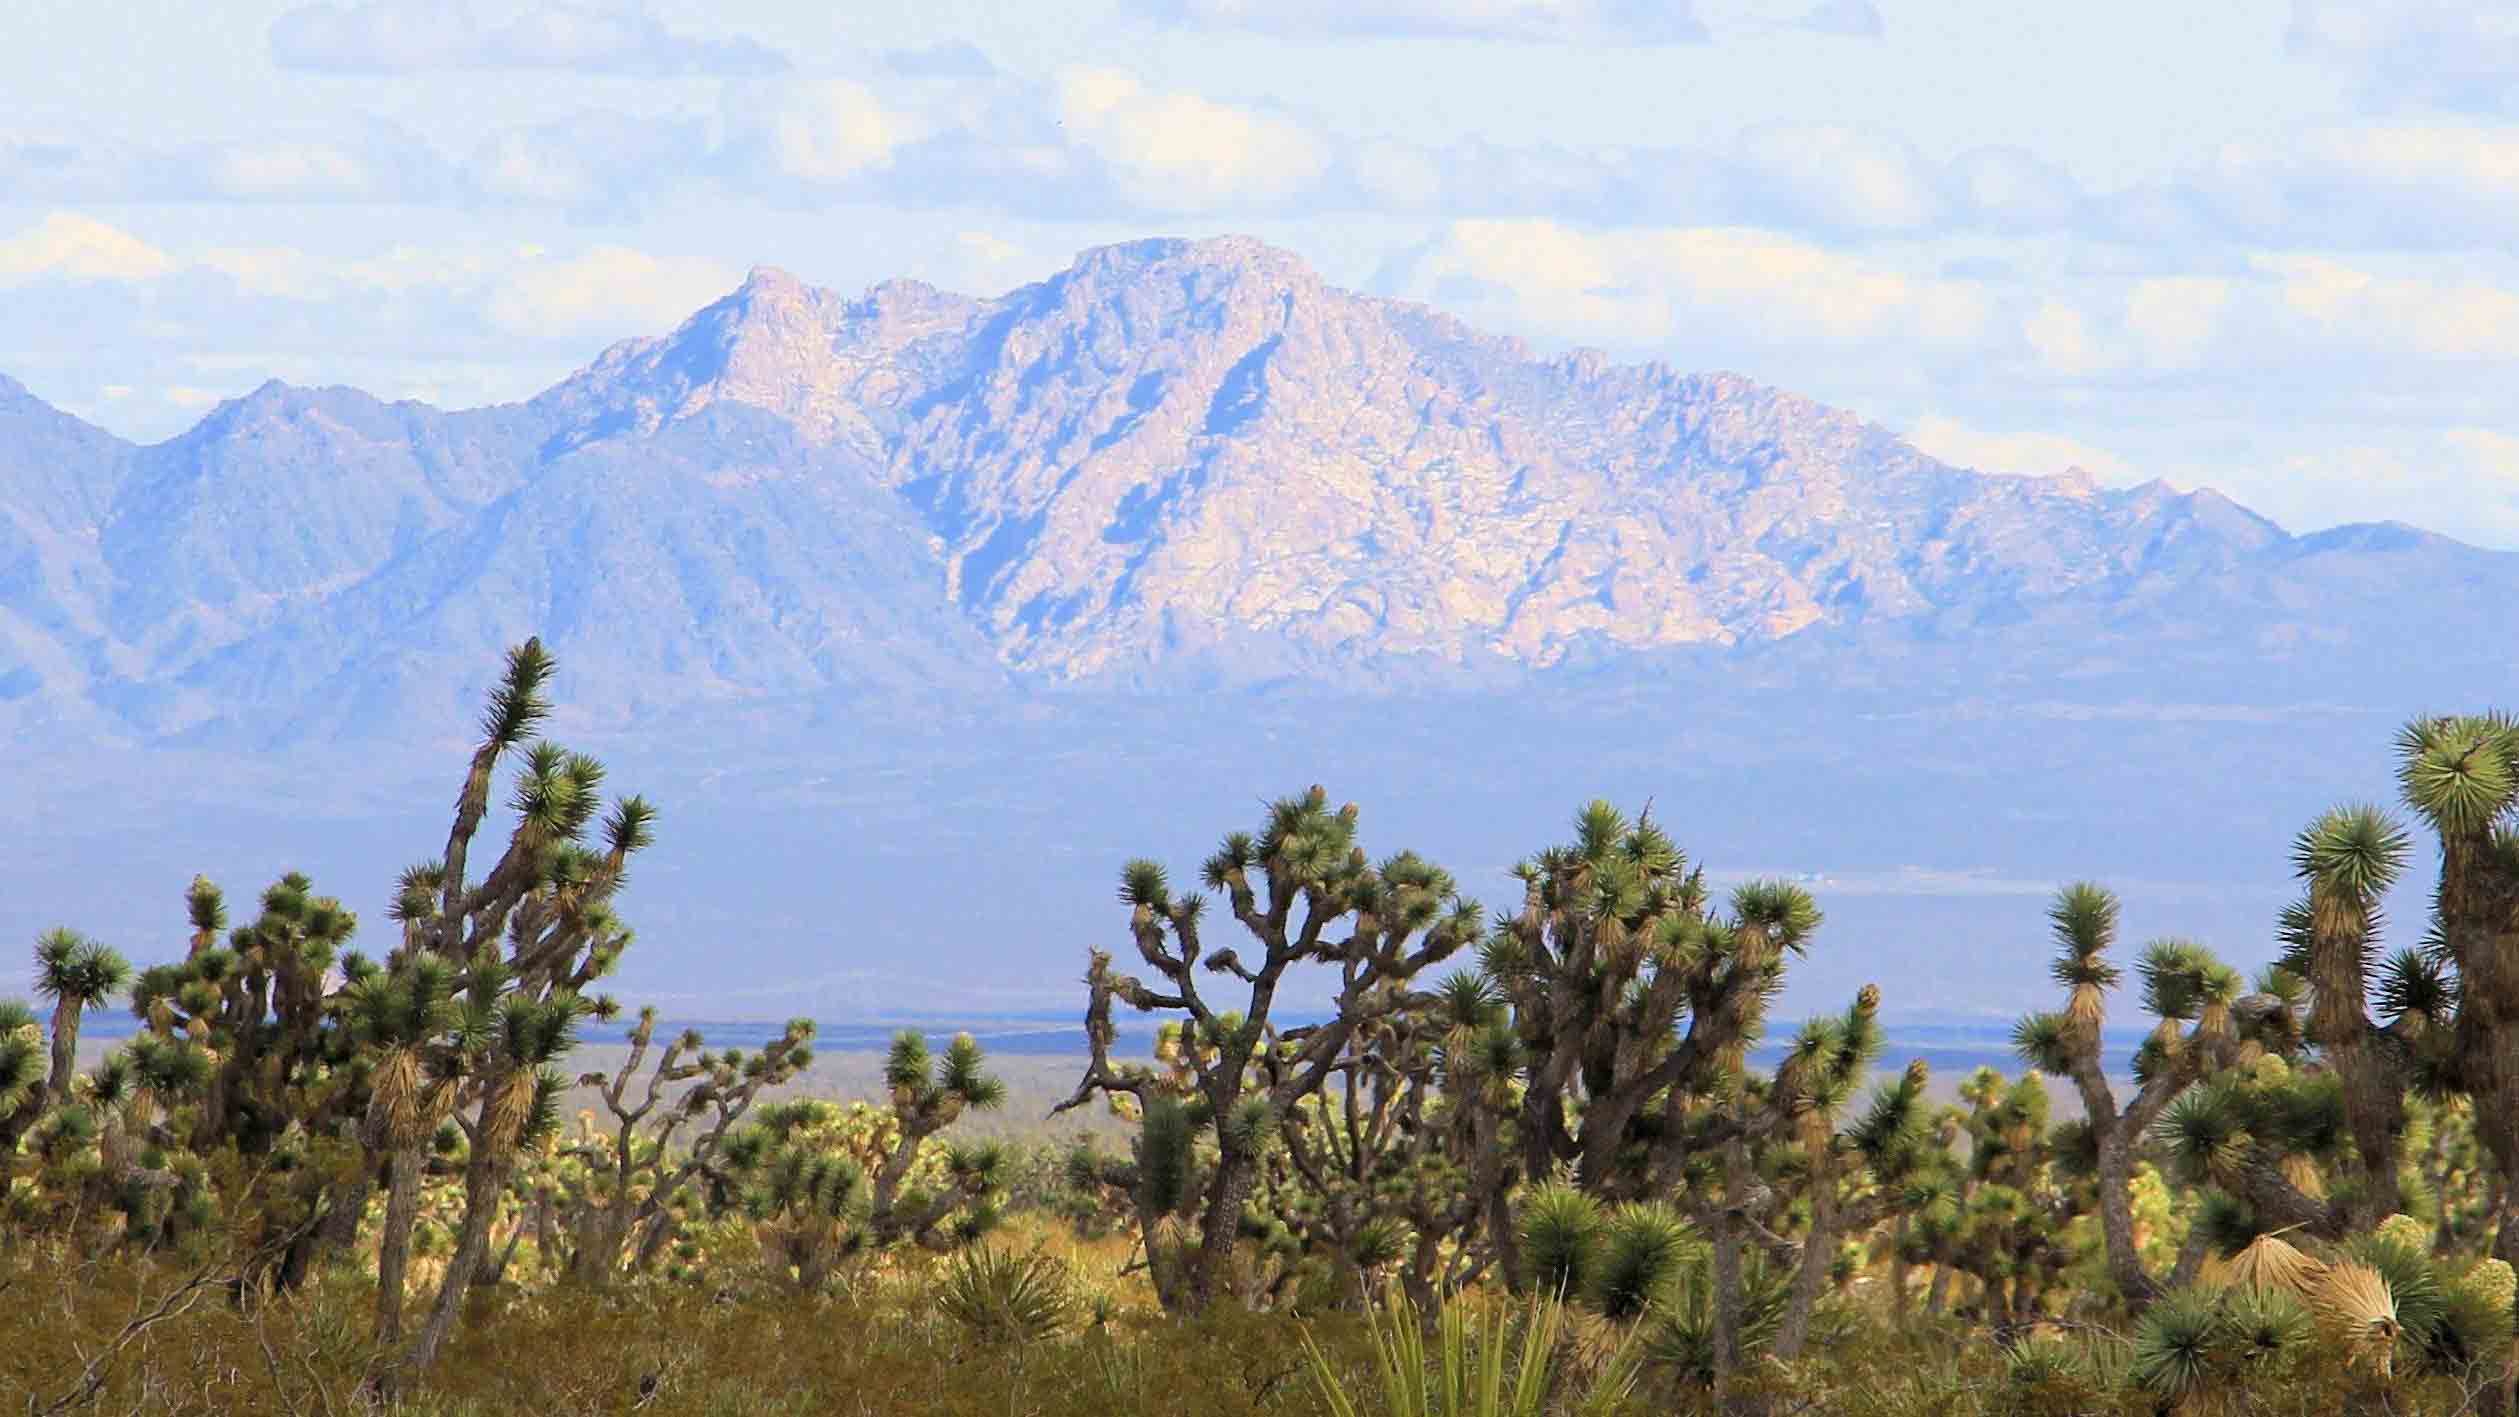 Biden To Designate Two New National Monuments, In Nevada And Texas